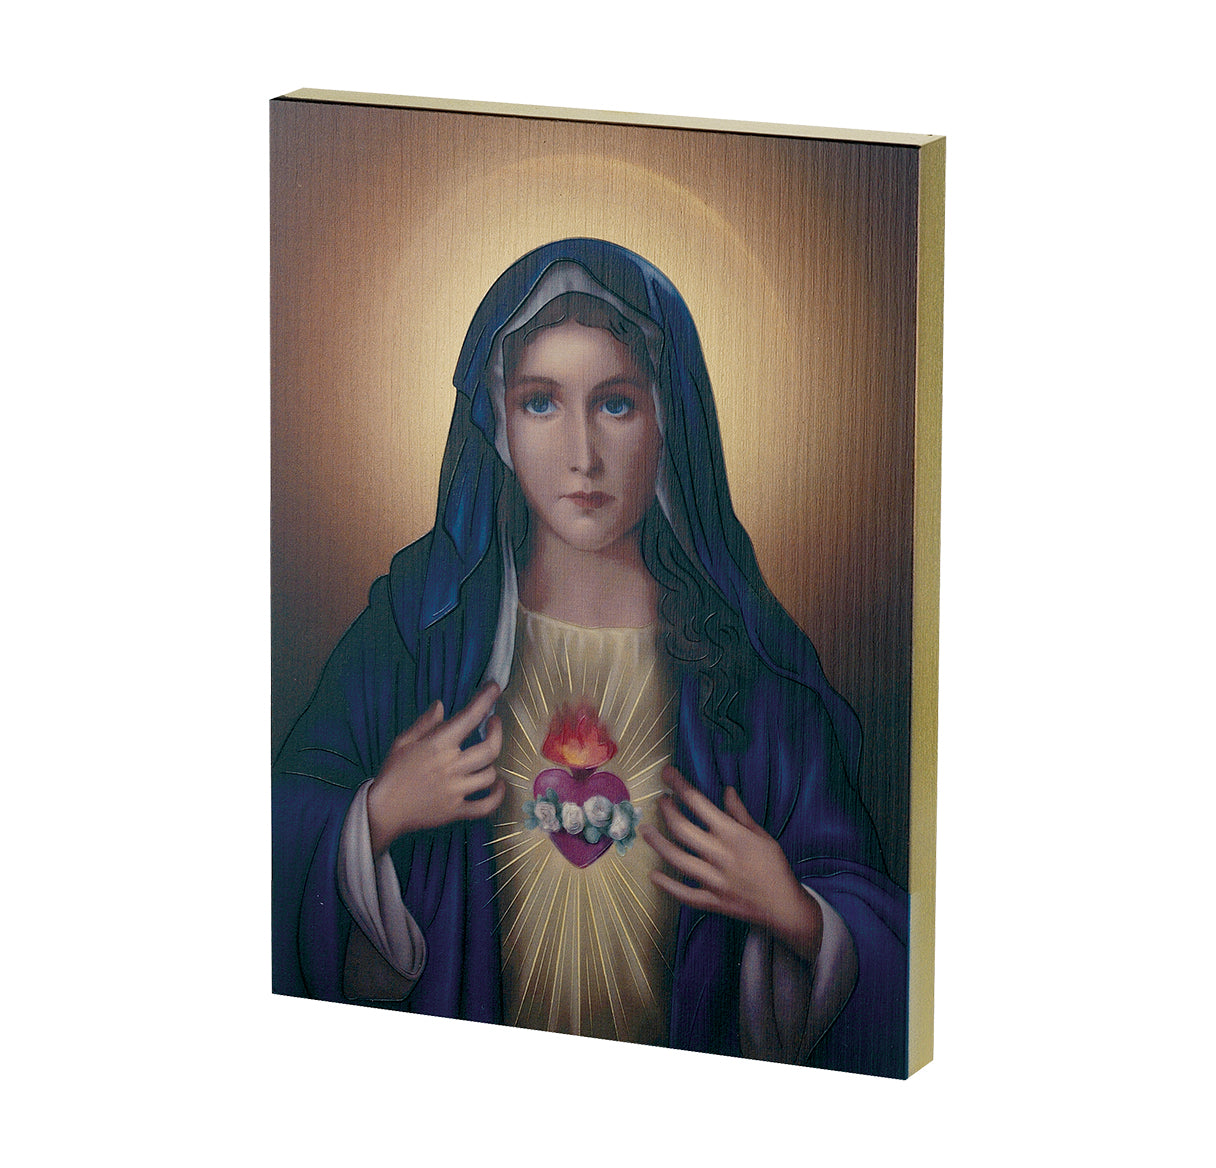 Immaculate Heart of Mary Textured Wood